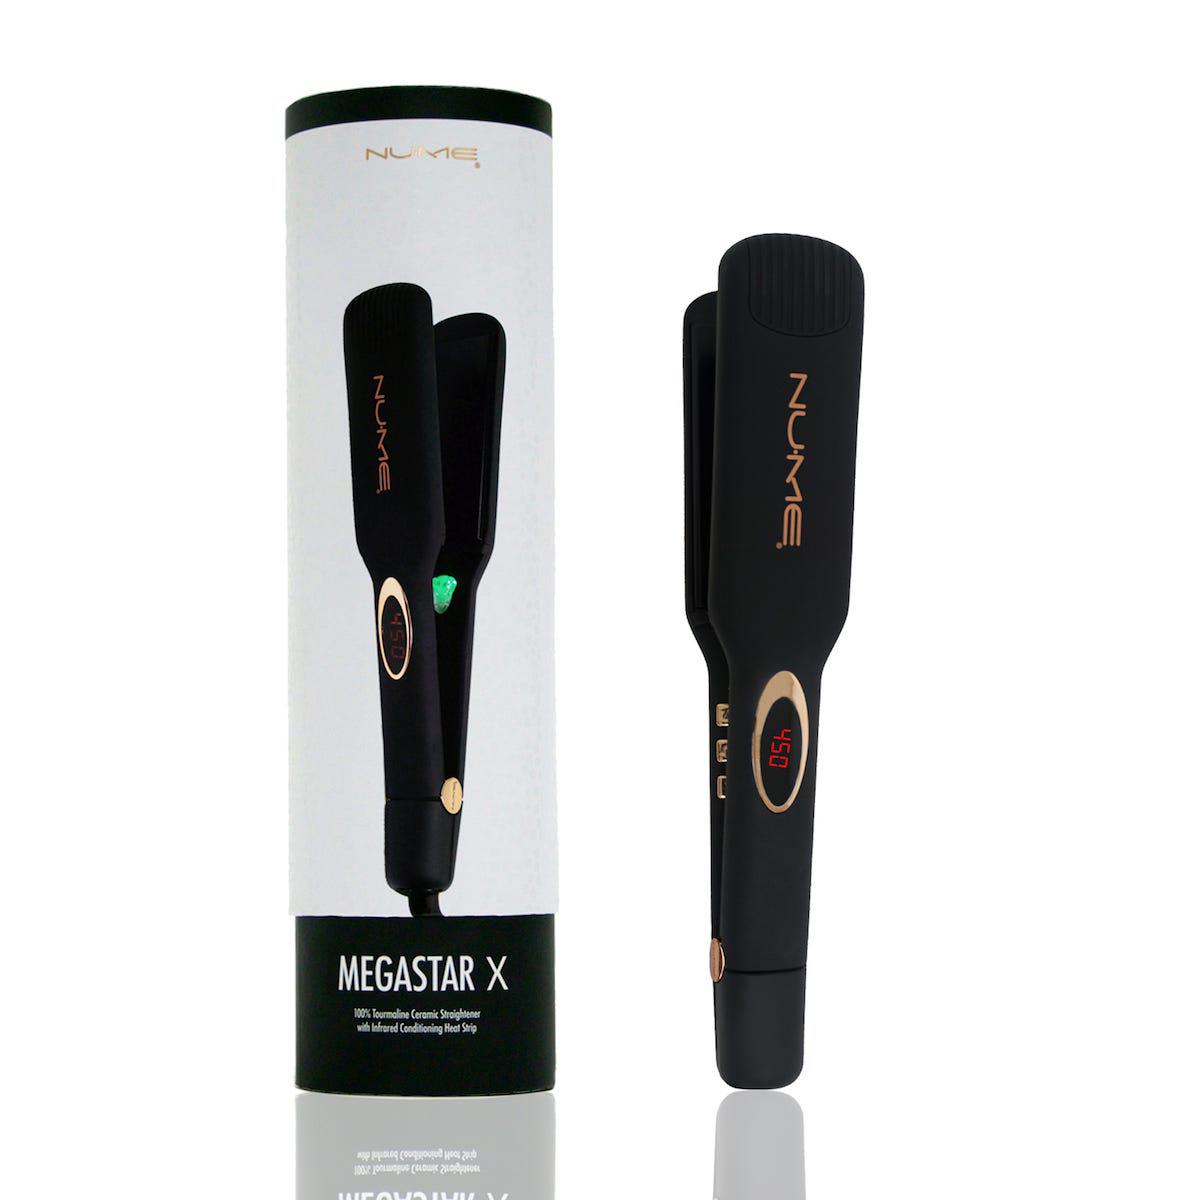 The Megastar X: The Revolutionary Straightener To Get the Salon Look At Home